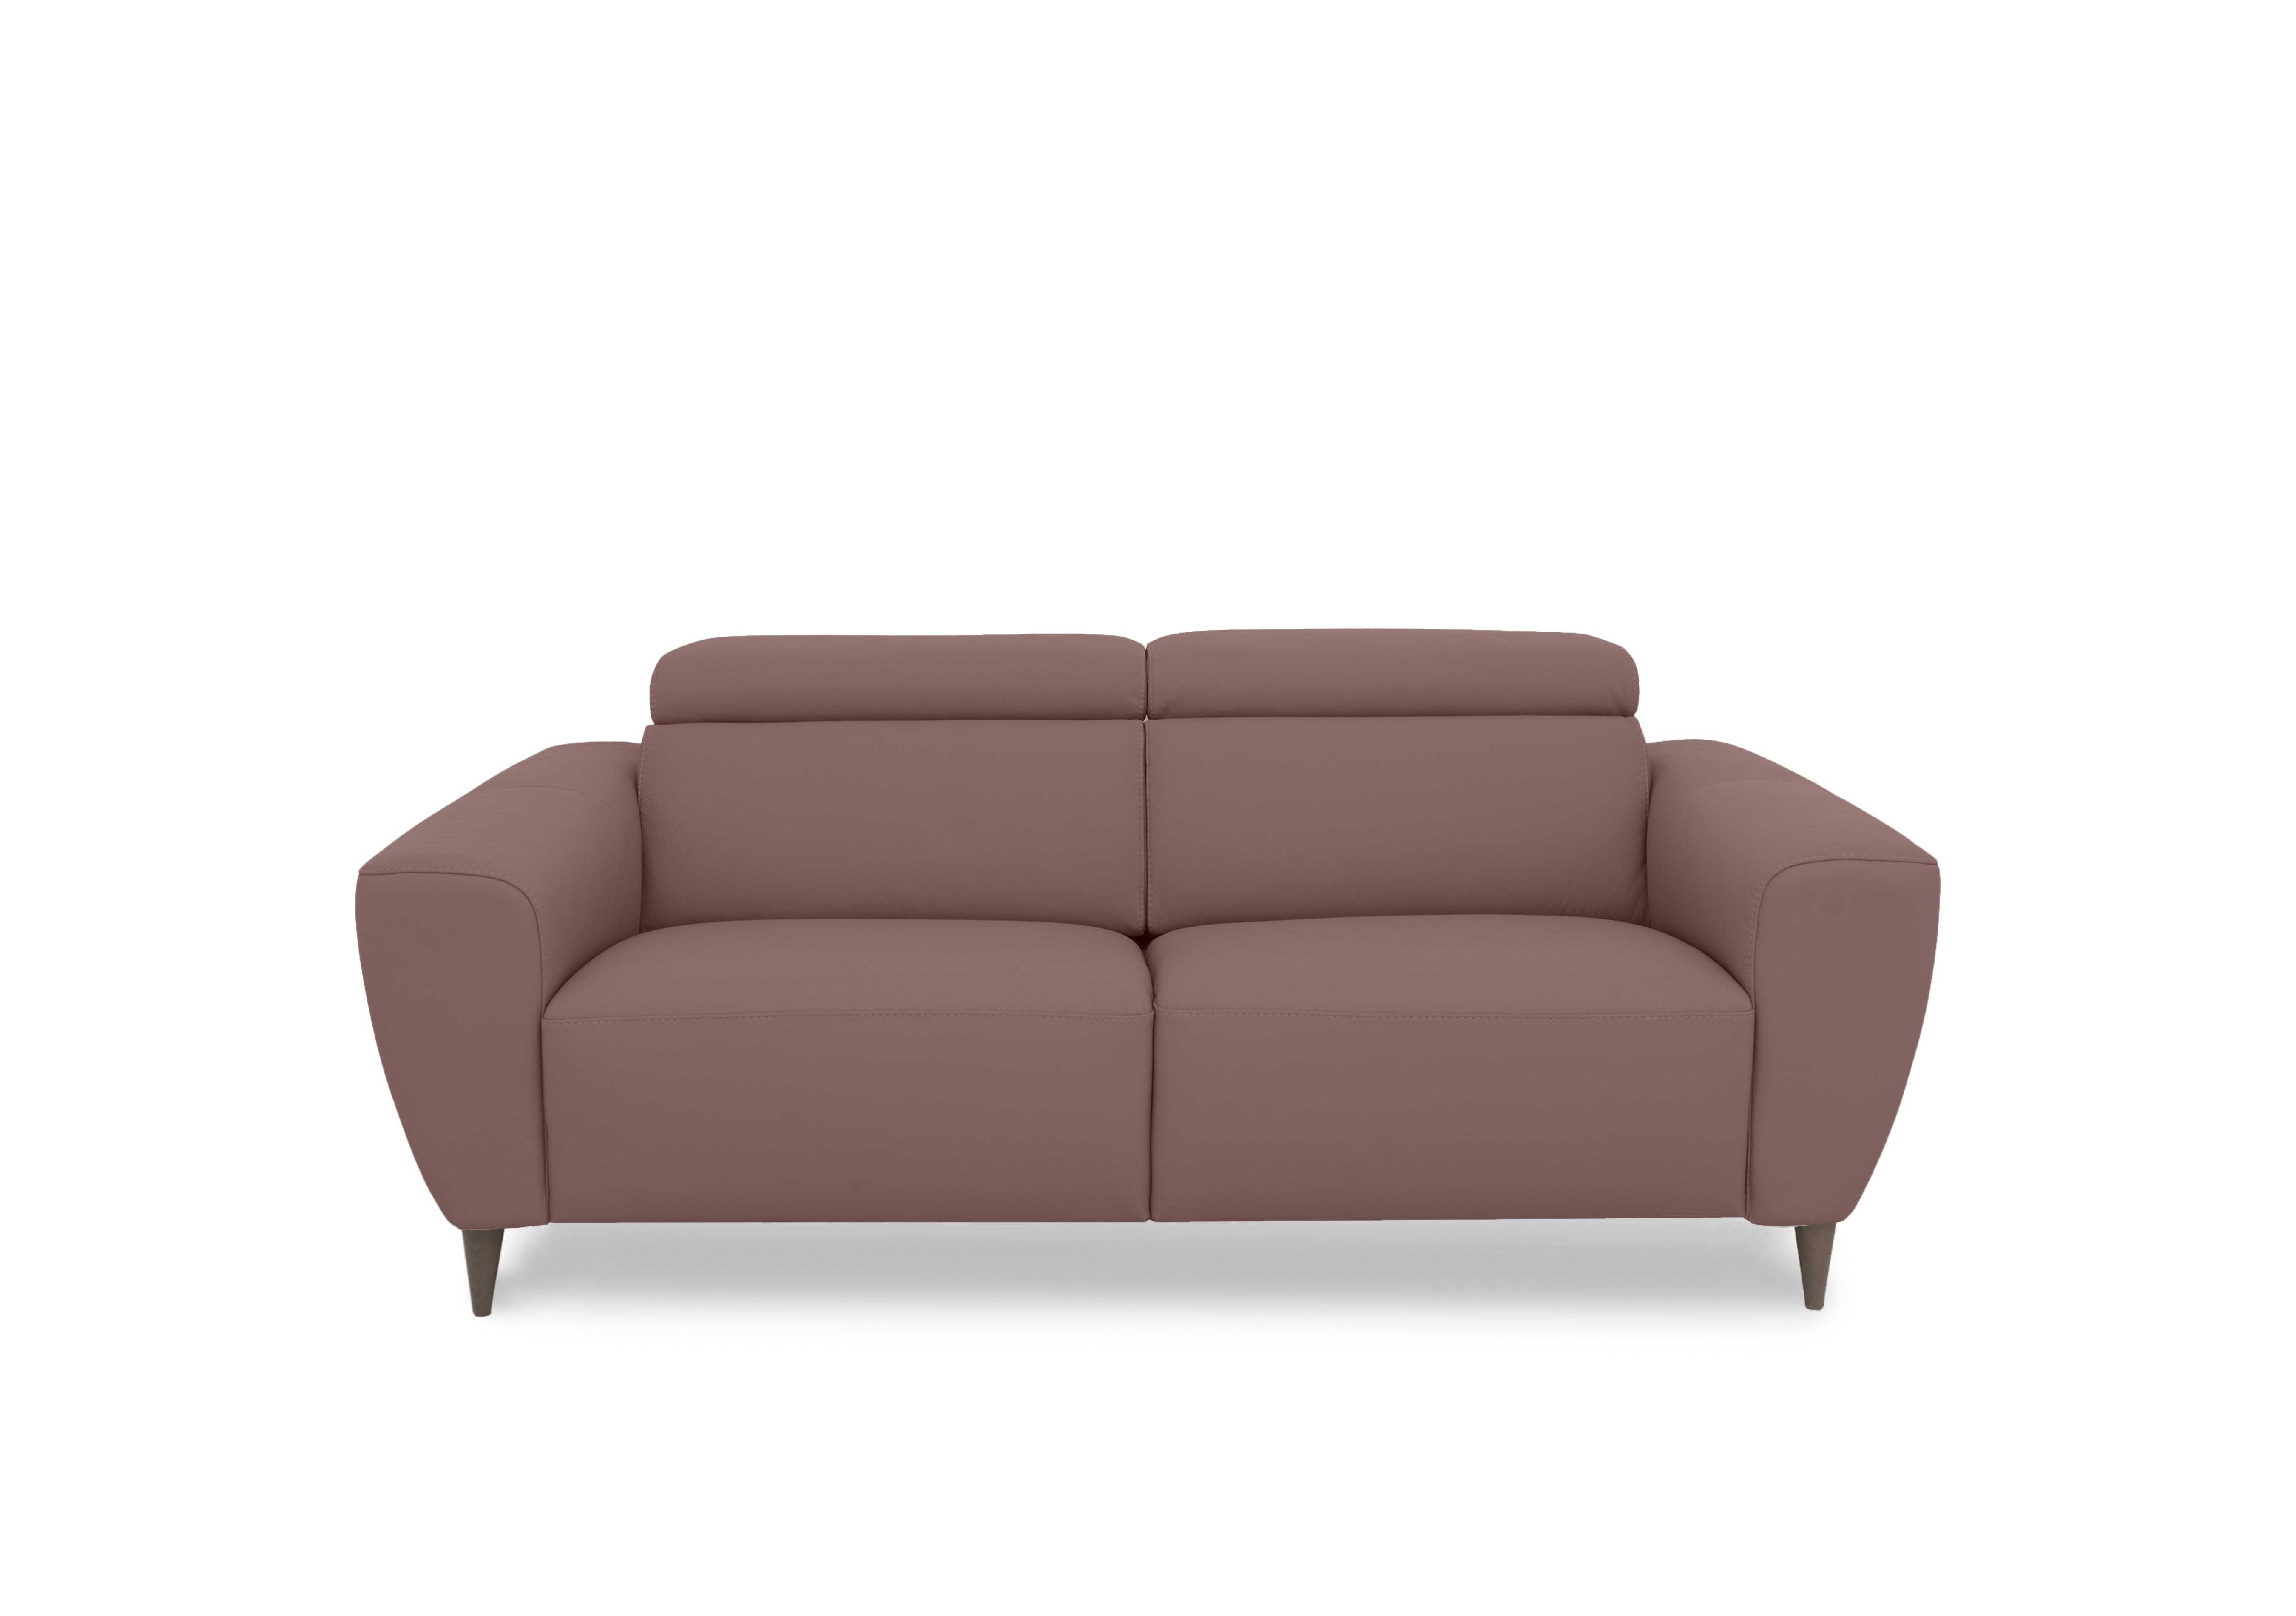 Milano 2.5 Seater Leather Sofa in 2160 Botero Cipria To Ft on Furniture Village